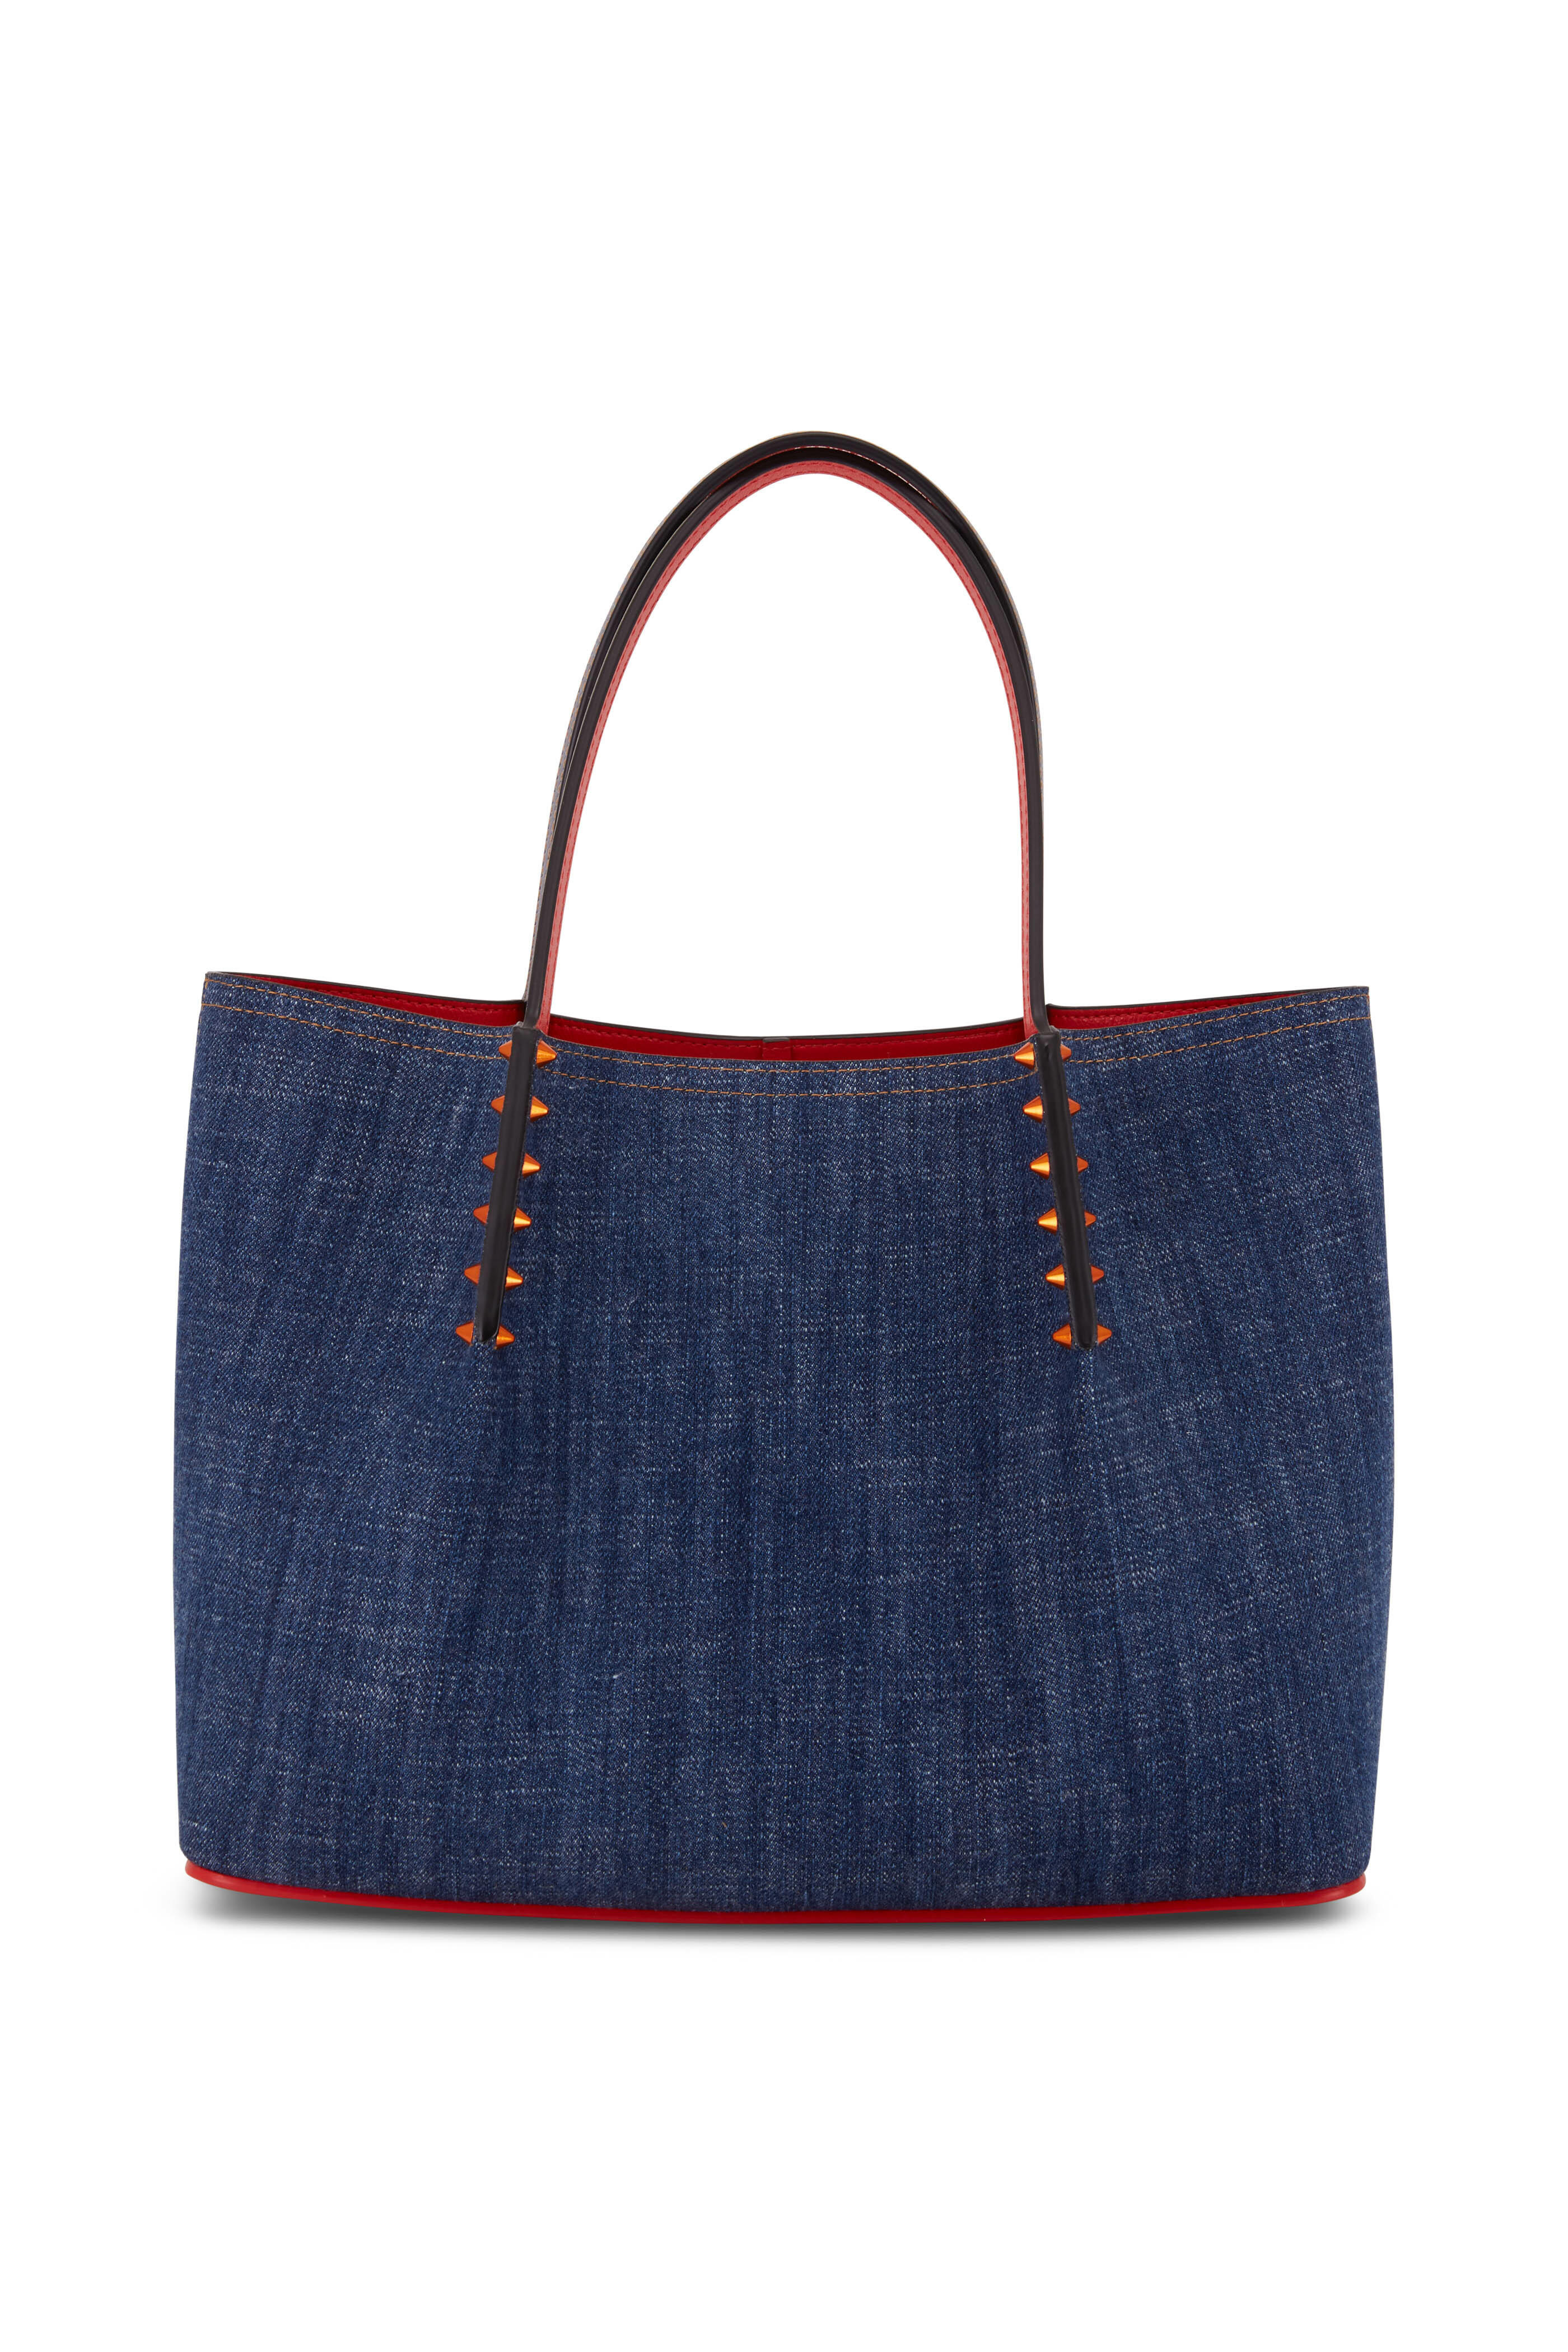 Christian Louboutin - Cabarock Denim Small Tote | Mitchell Stores